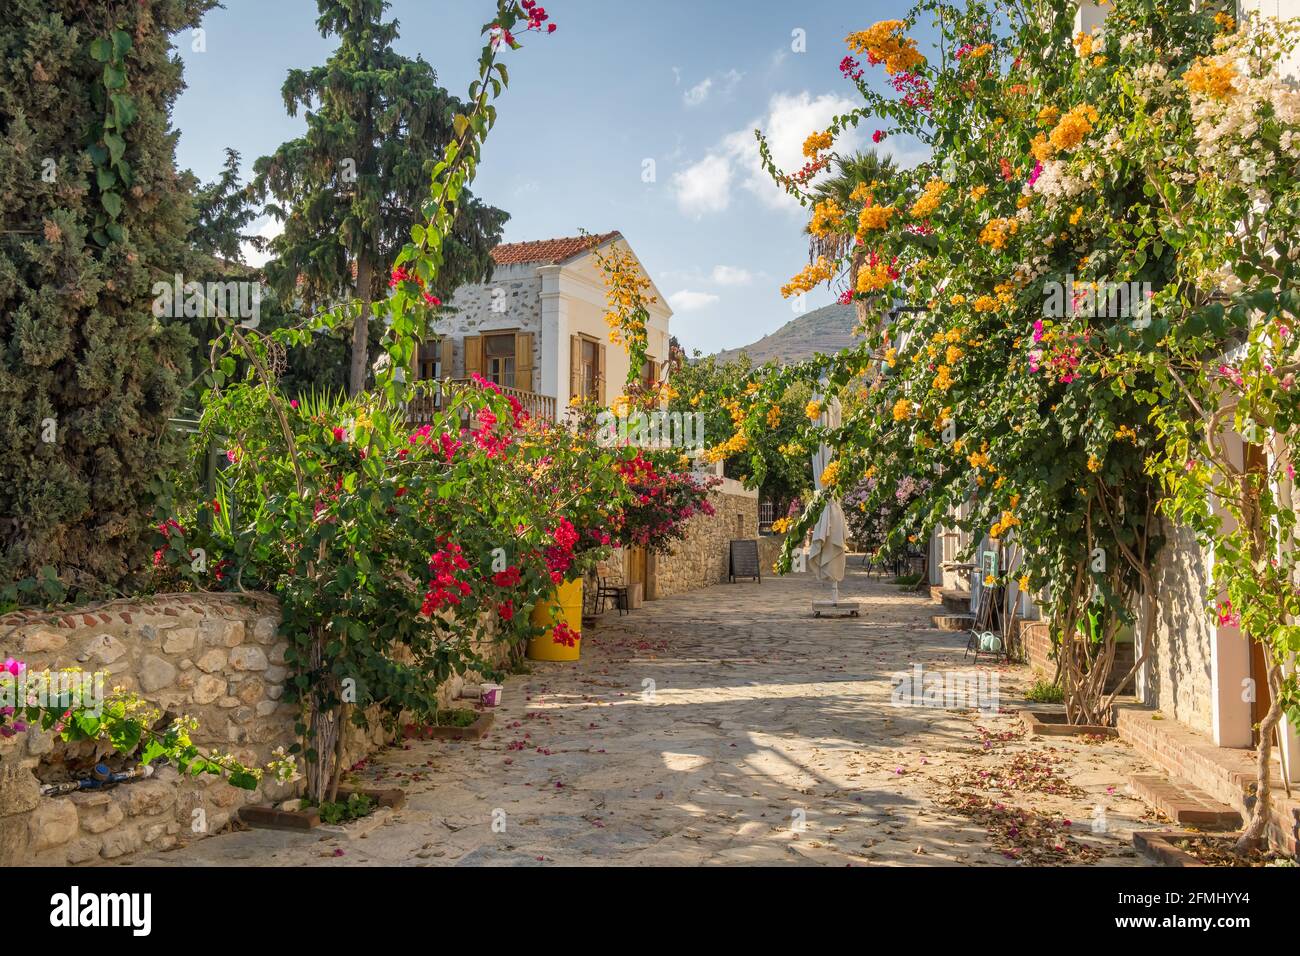 Colorful street with flowers in Old Datca, Turkey Stock Photo